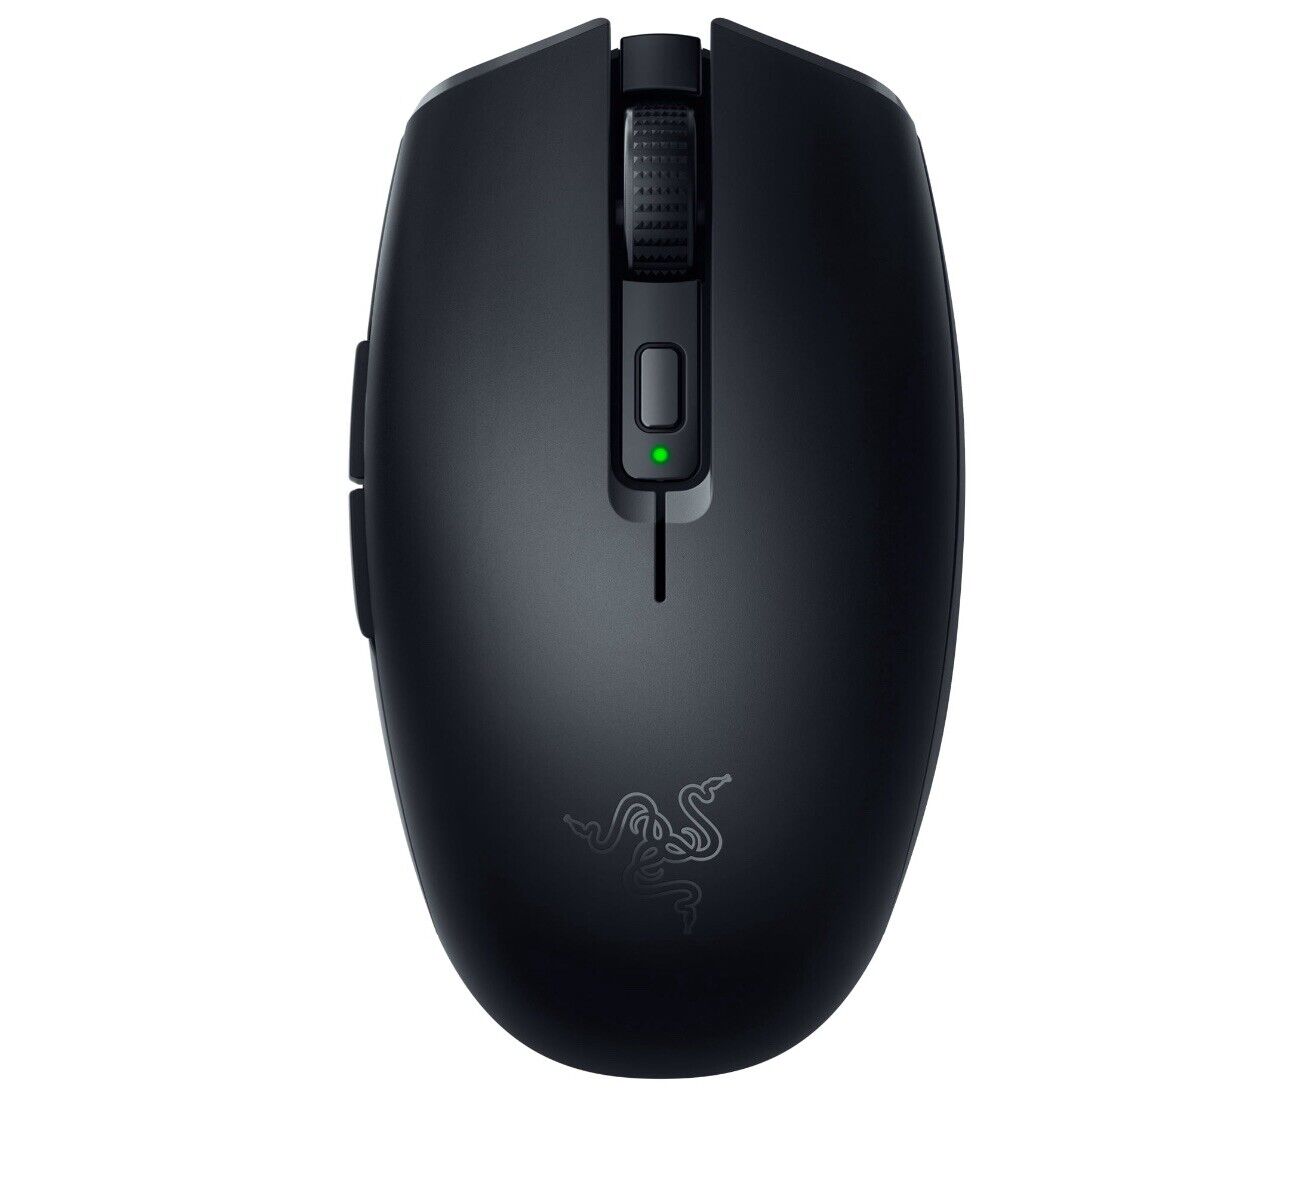 Razer Orochi V2 Wireless Optical Gaming Mouse, 6 Buttons, Bluetooth - Black